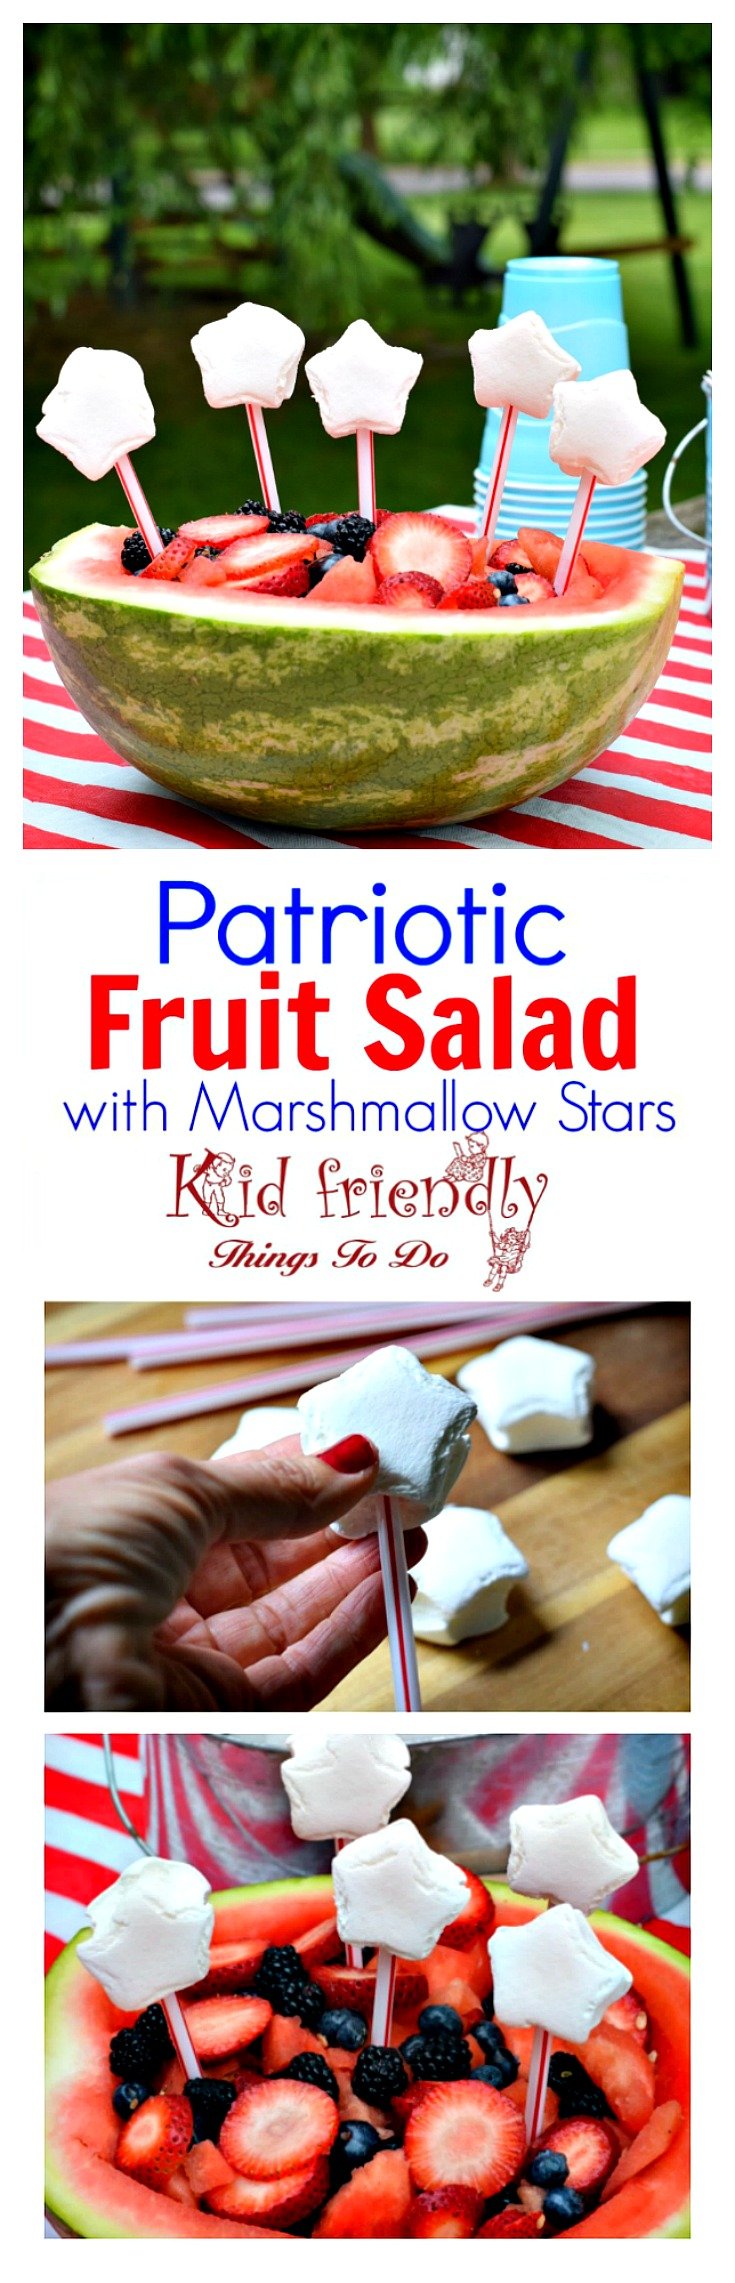 Red, White and Blue Easy to make Patriotic Fruit Salad in a watermelon bowl. Great fun treat for the kids on Memorial Day, Labor Day, Fourth of July or summer picnic parties! www.kidfriendlythingstodo.com